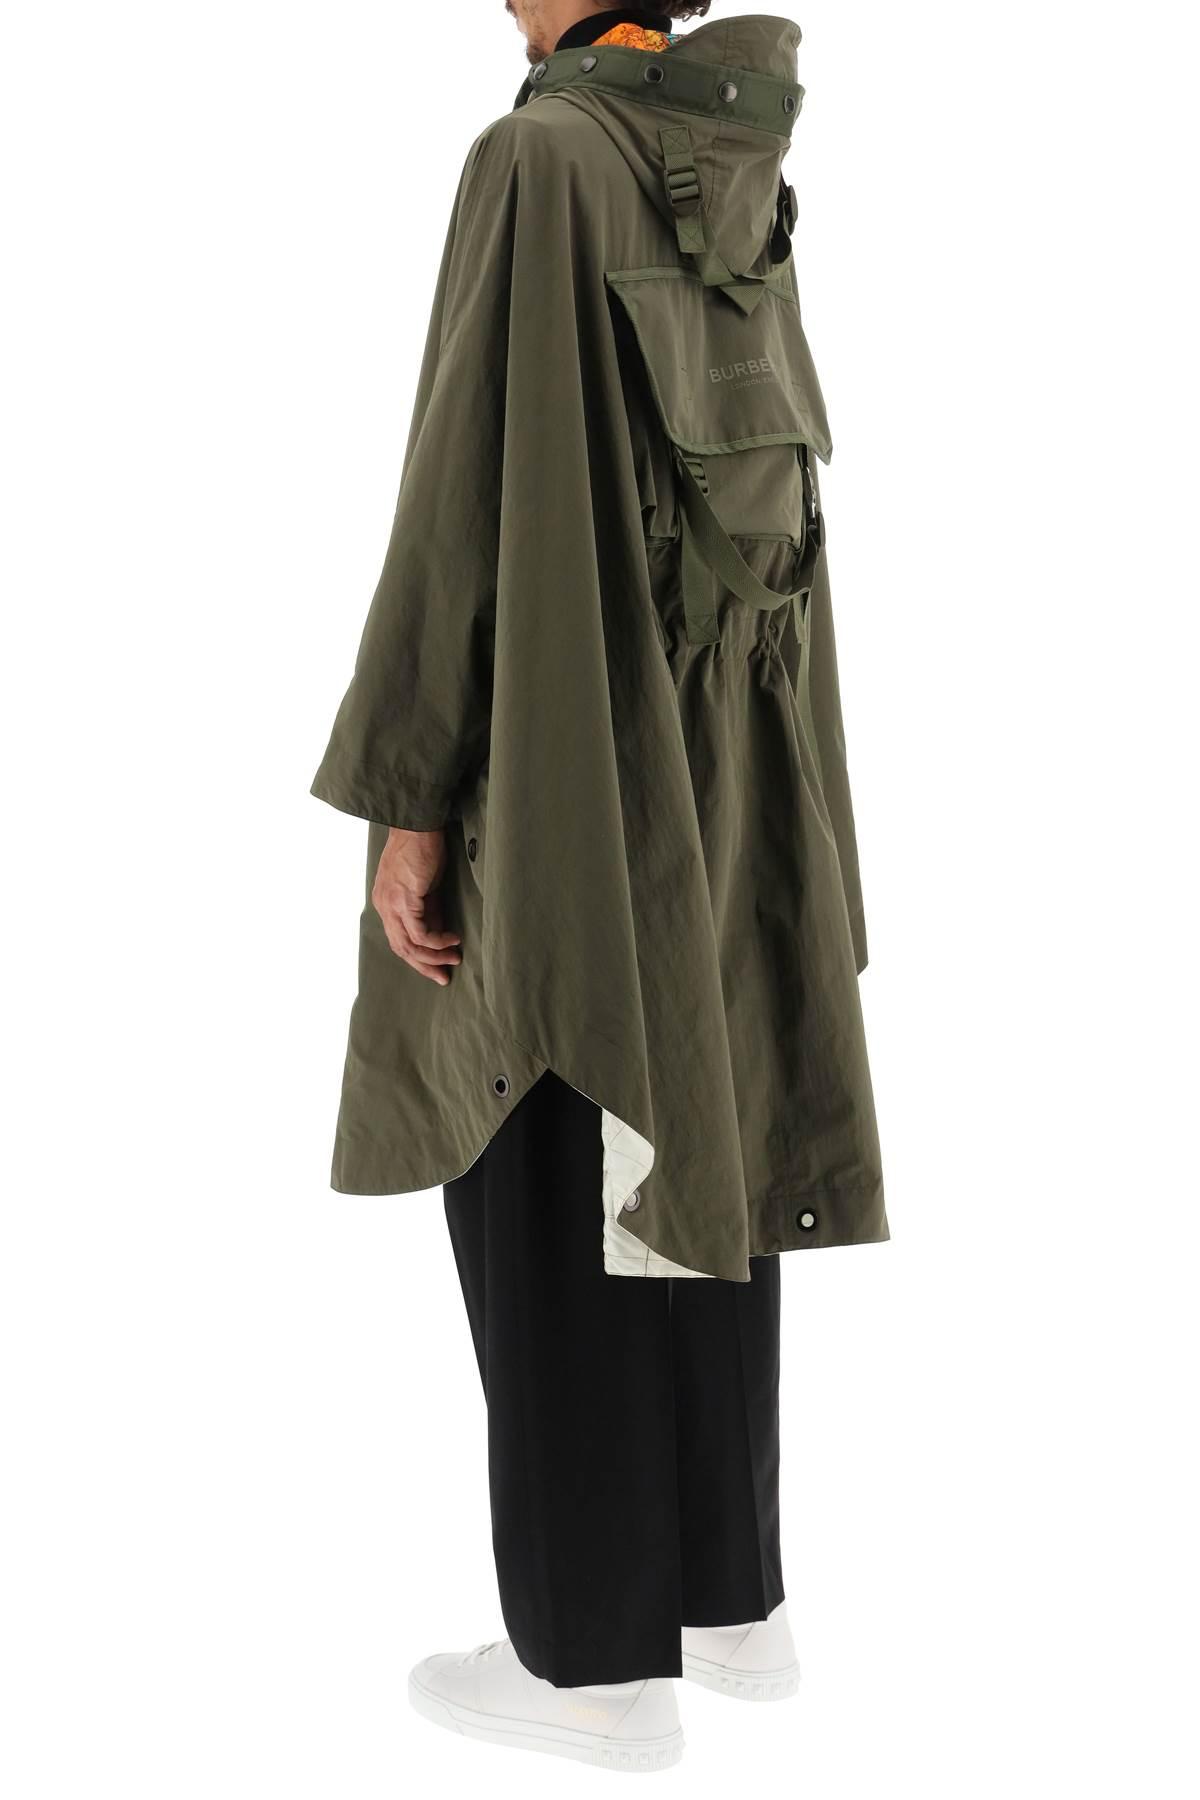 Burberry Cotton Packaway Hooded Cape in Khaki (Green) for Men 